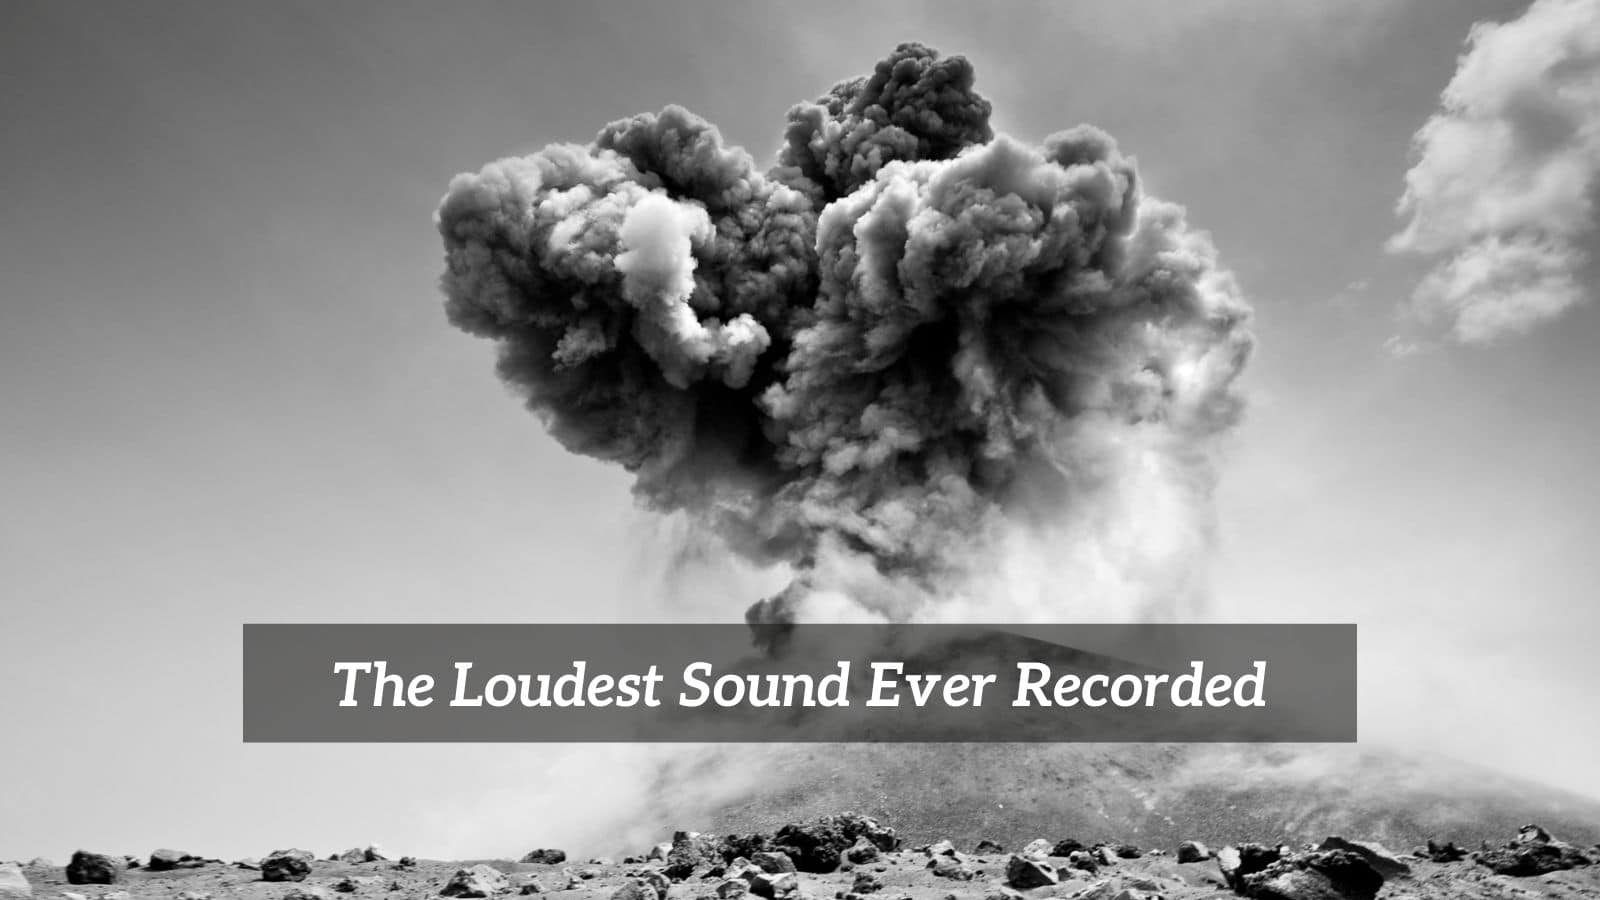 The Loudest Sound Ever Recorded